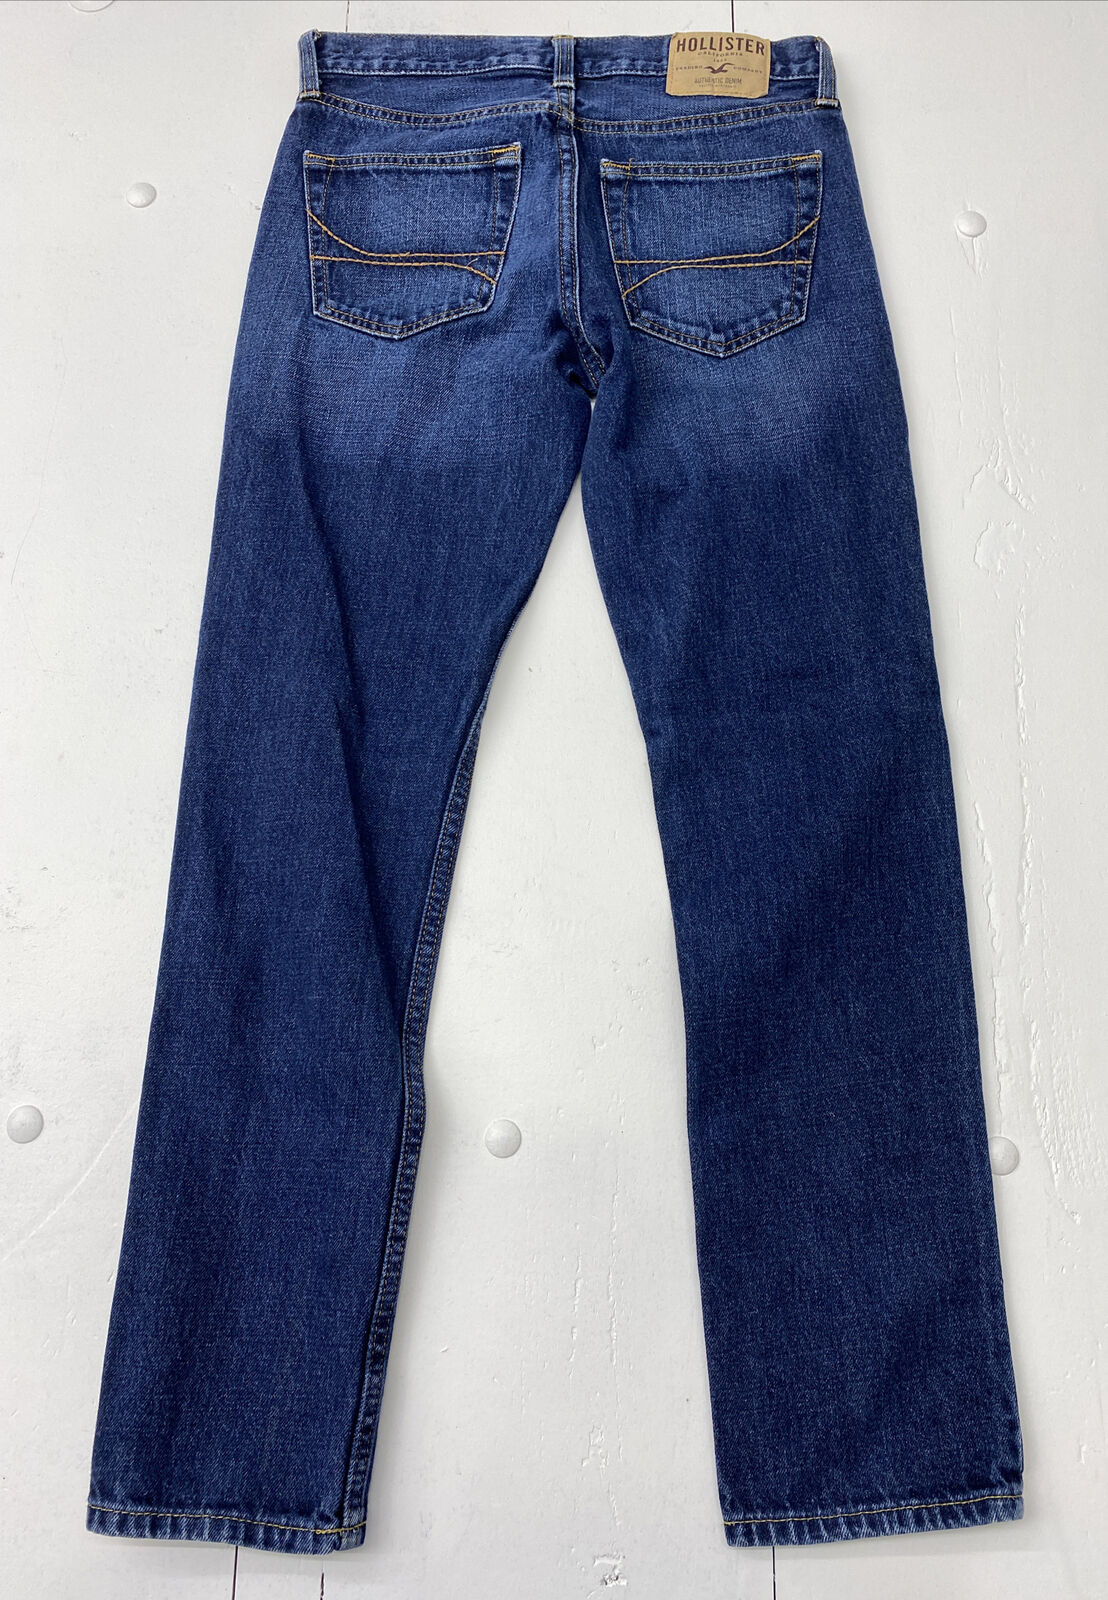 Hollister The Hollister Skinny Button Fly Jeans Men's Size 29X30 - beyond  exchange